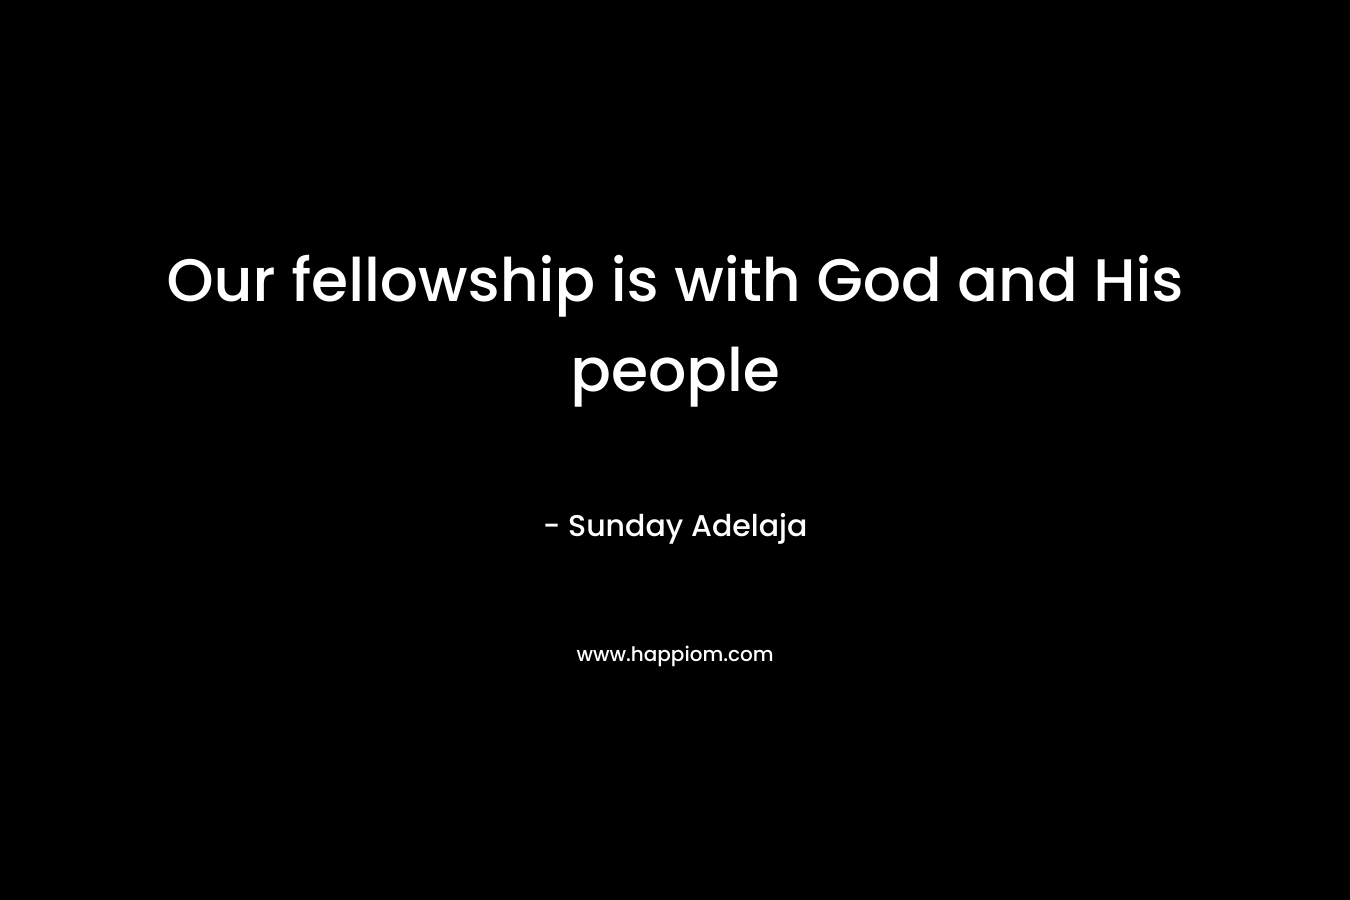 Our fellowship is with God and His people